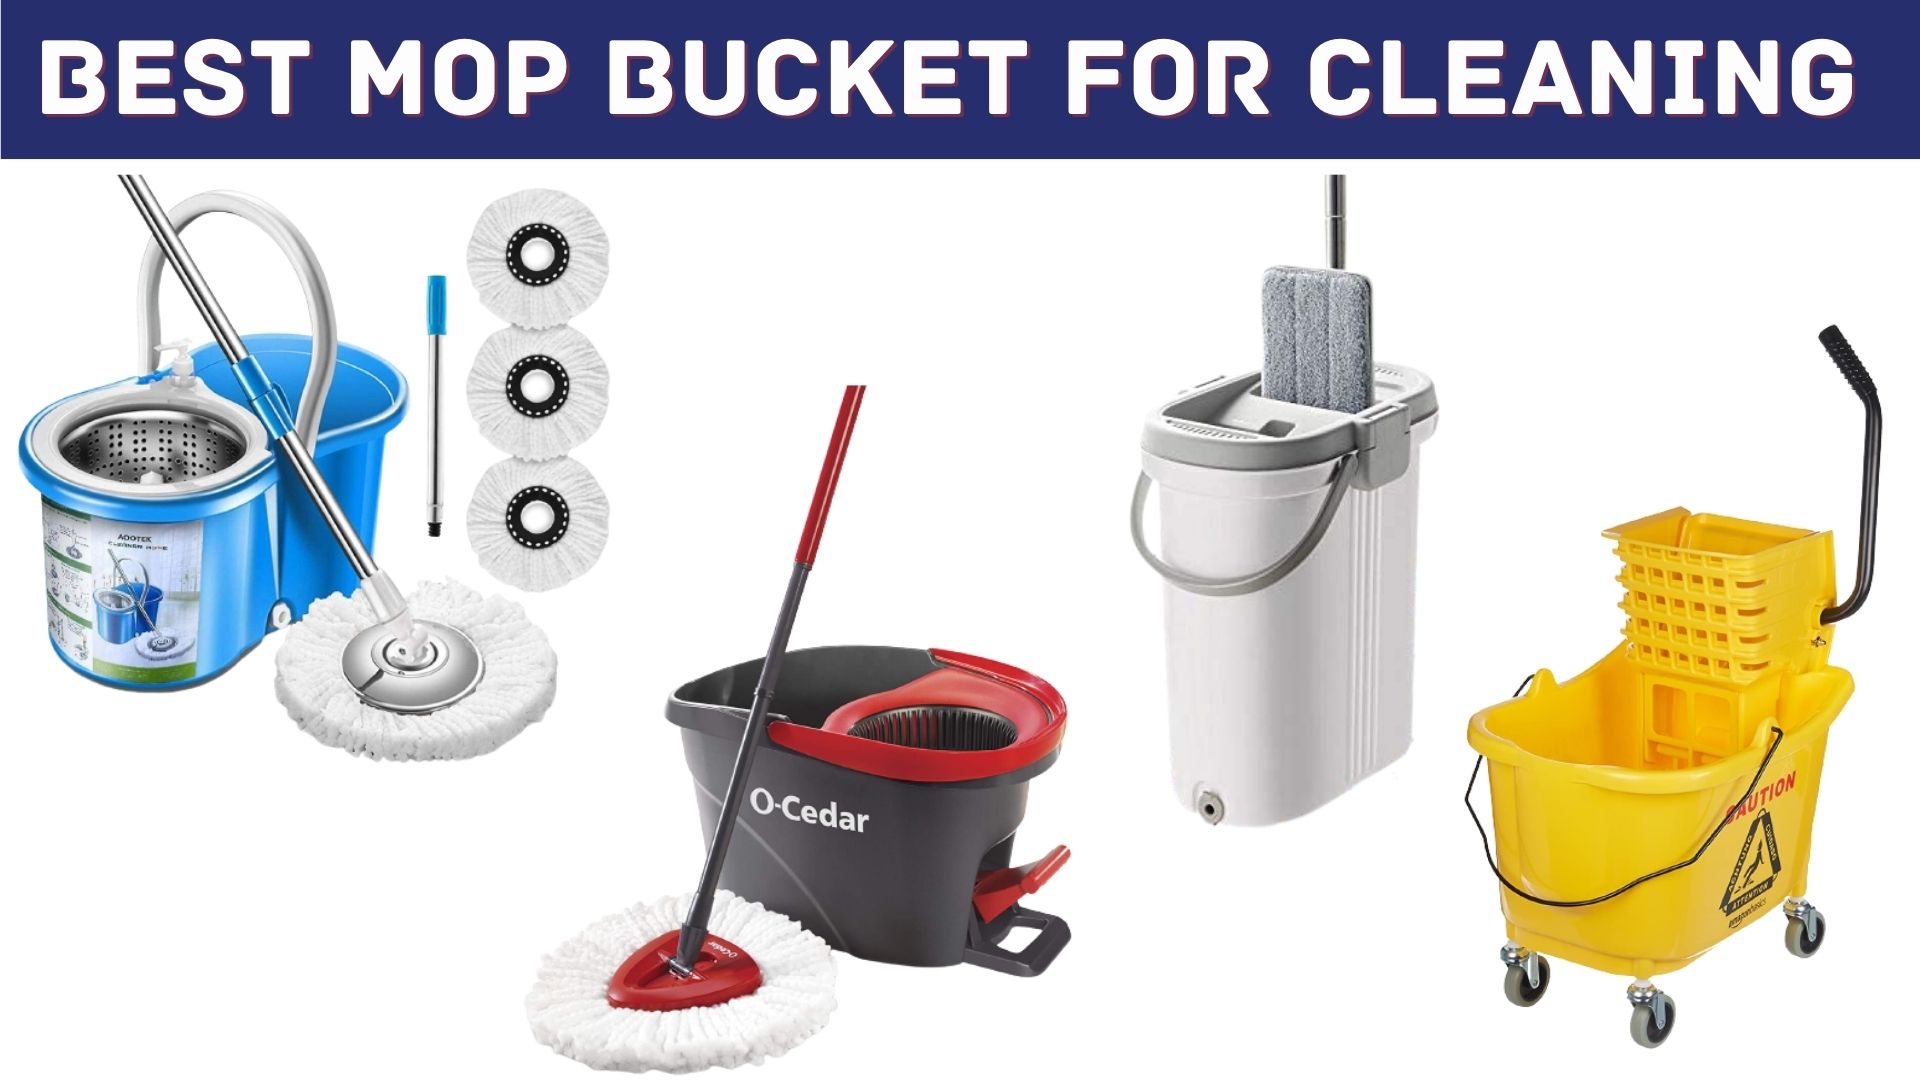 Best Mop Bucket for Cleaning Your Flooring